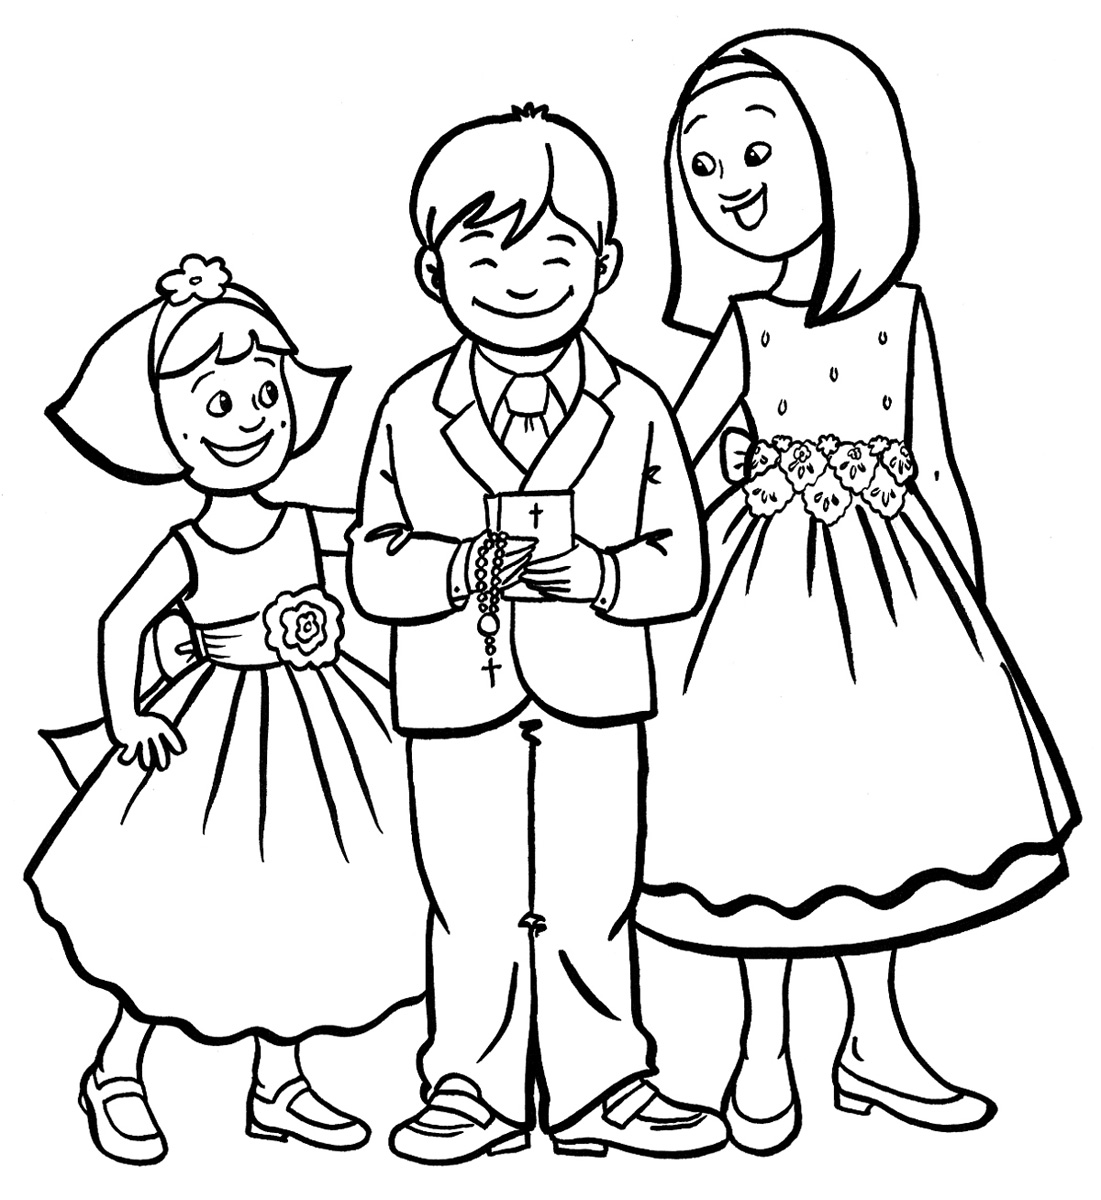 First Communion Coloring Pages | Printable Coloring Pages For Kids ...